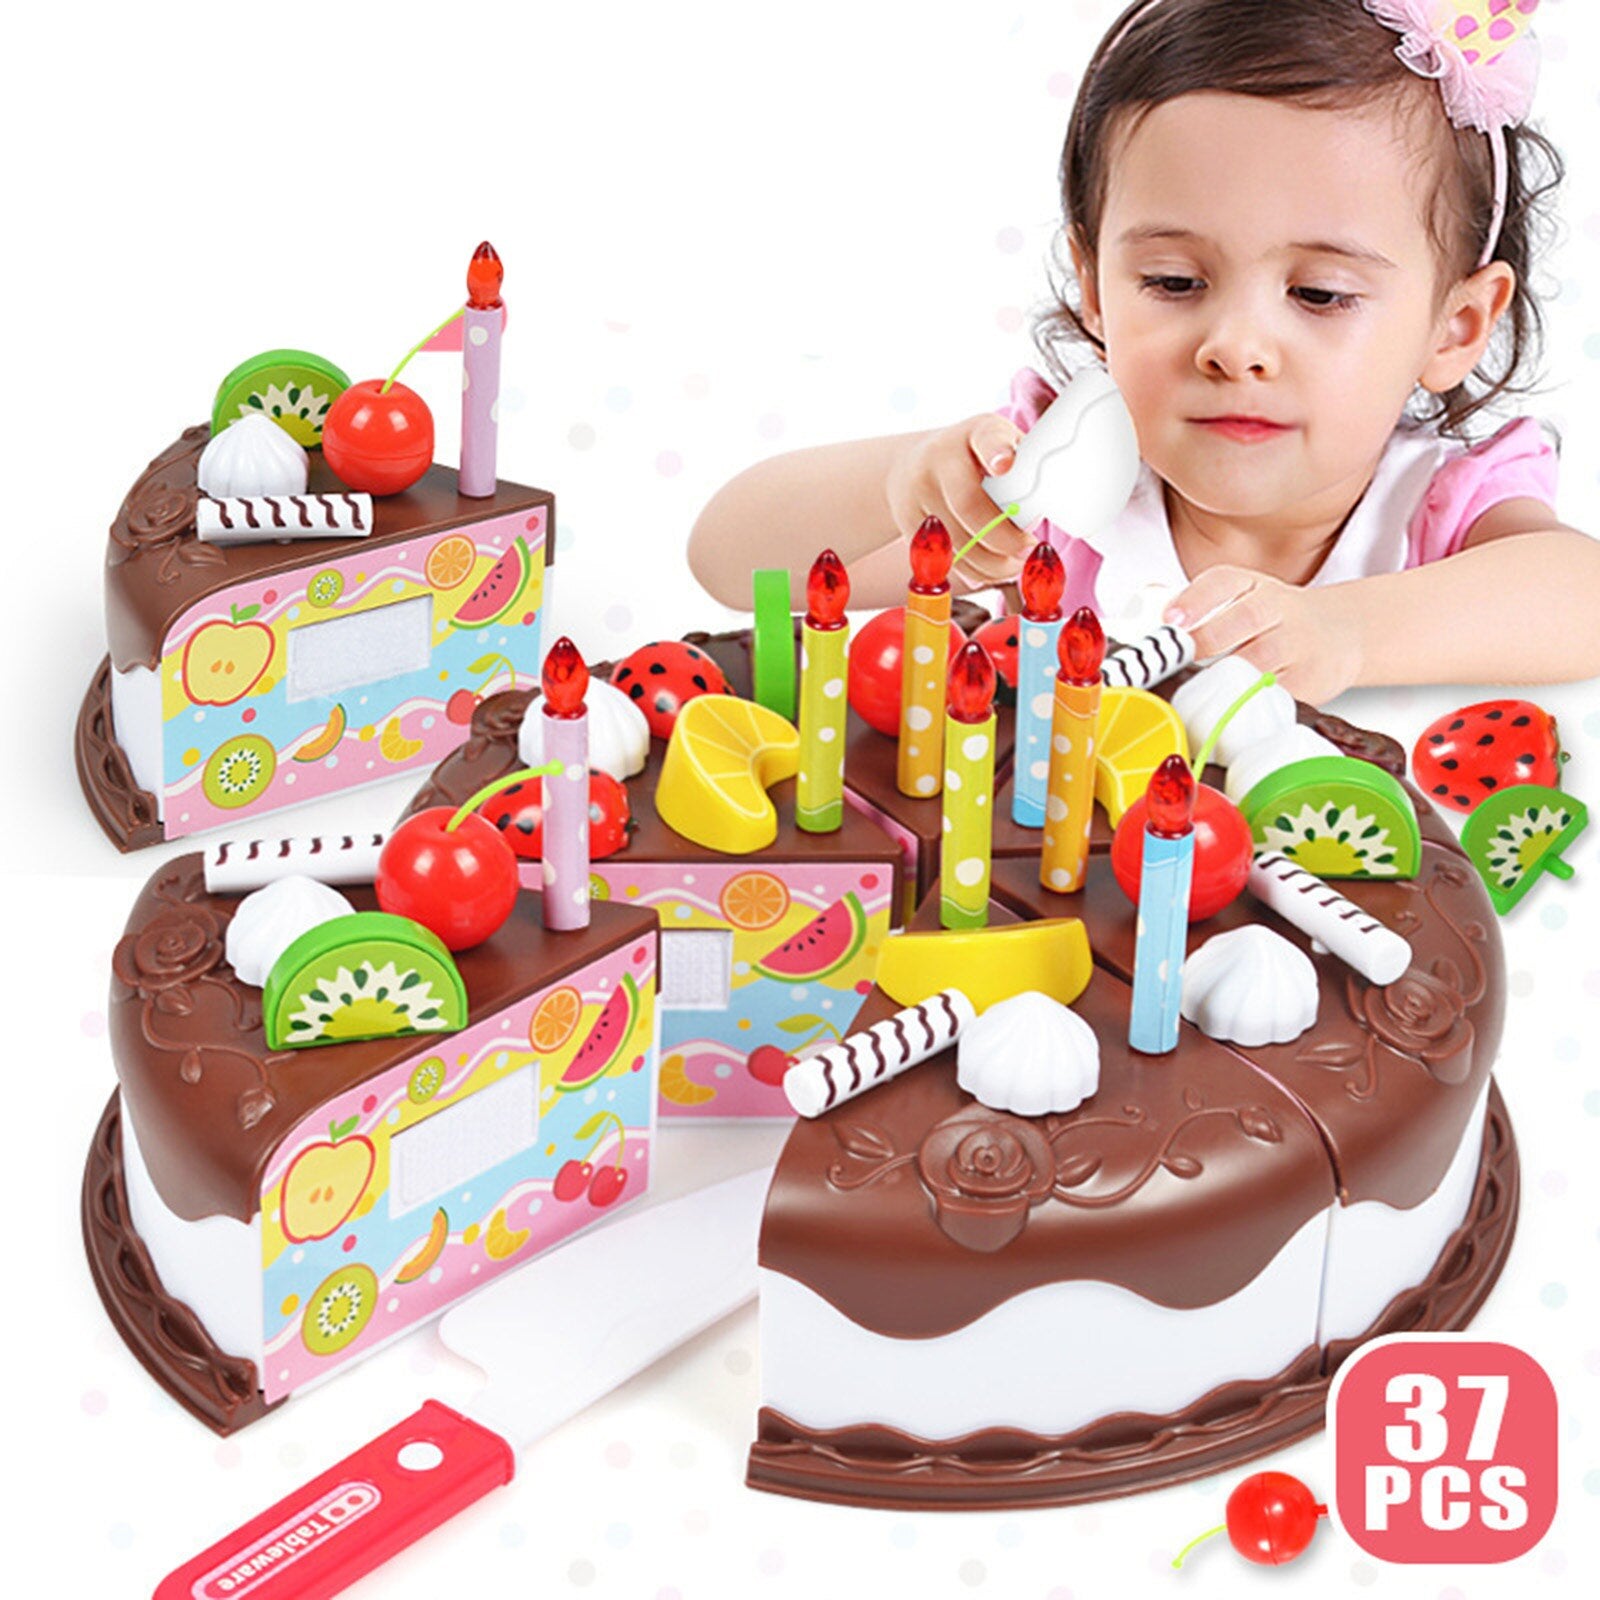 Kids Birthday Cake Toy for Baby & Toddlers with Counting Candles & Fruits  Gift Toys for 1 2 3 4 5 Years Old Boys and Girls